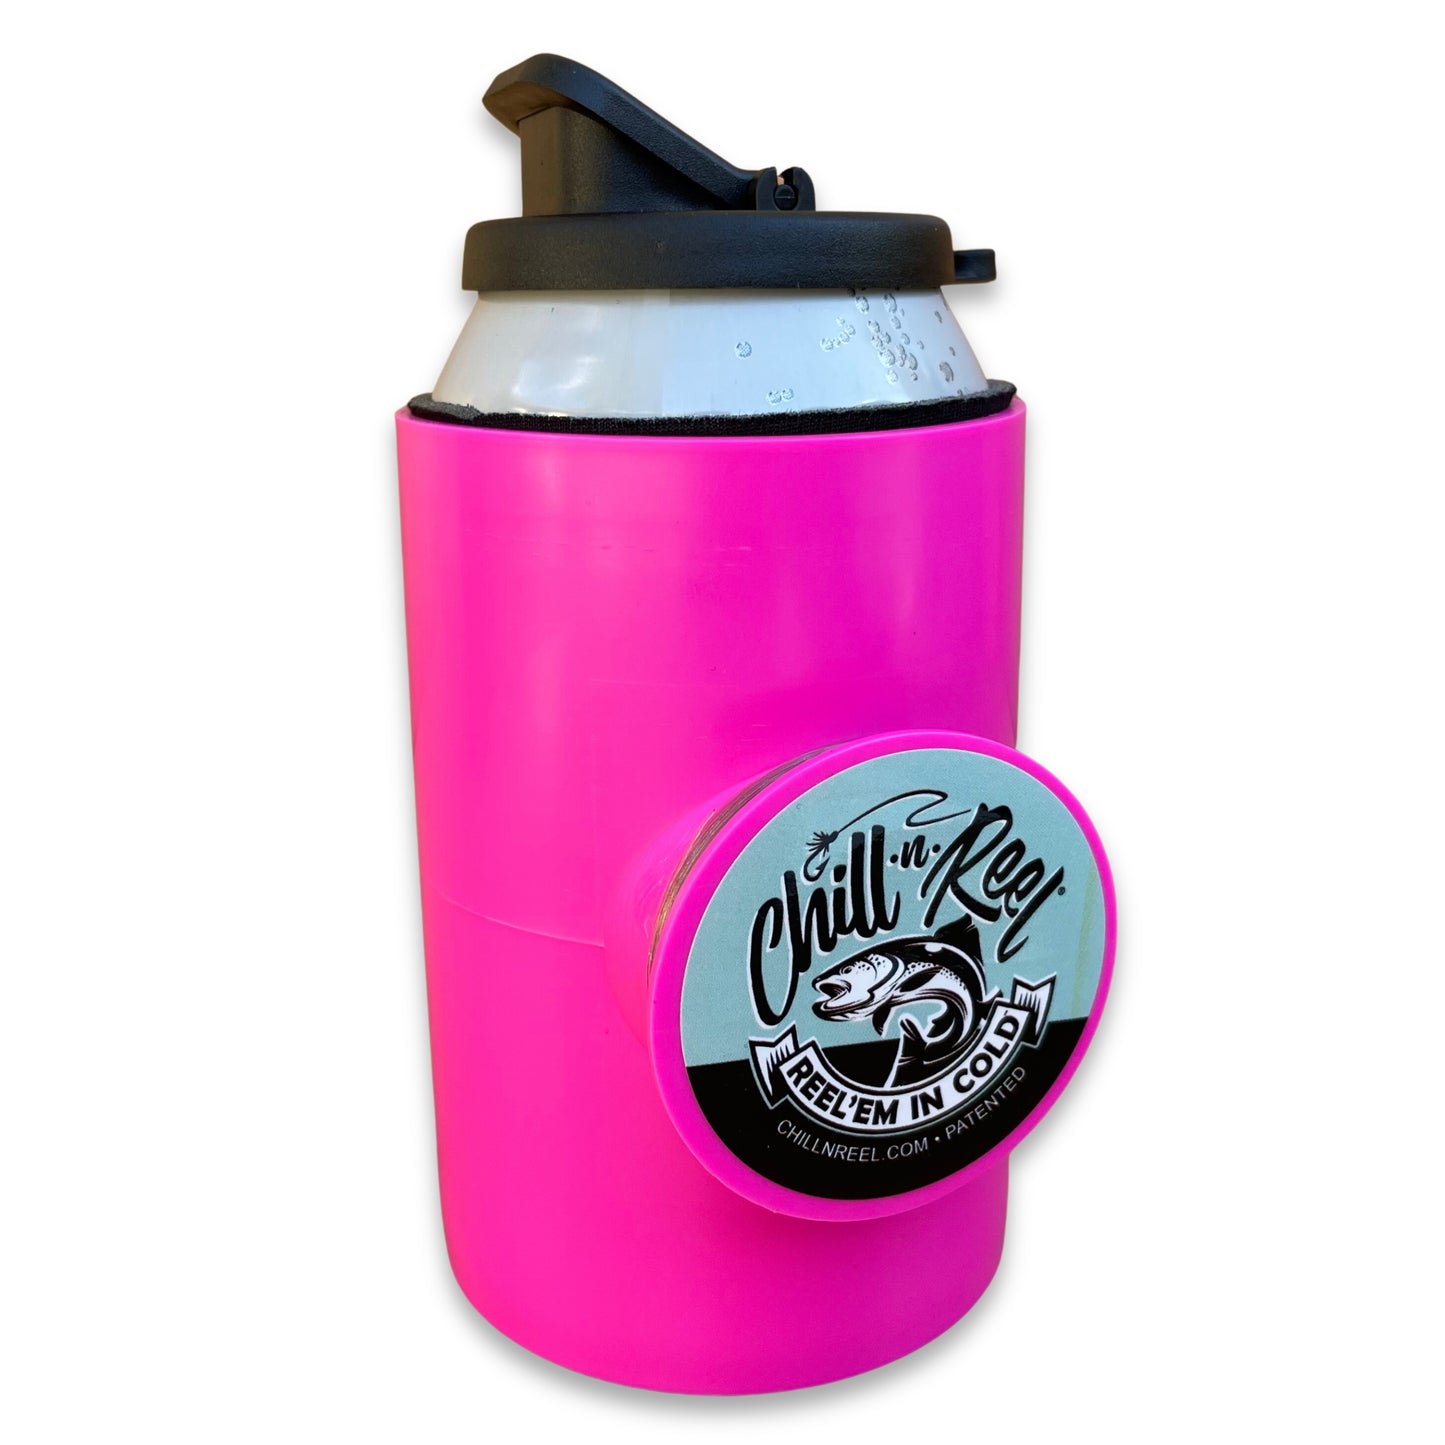 A fun fishing gift, this drink cooler is designed to look like a fishing reel with the text "Chill 'N' Reel" and a fish logo on the front. The pink cooler features a black flip-top lid and showcases the website URL, "chillnreel.com." This unique Original Chill-N-Reel by Chill-N-Reel even caught attention on Shark Tank!